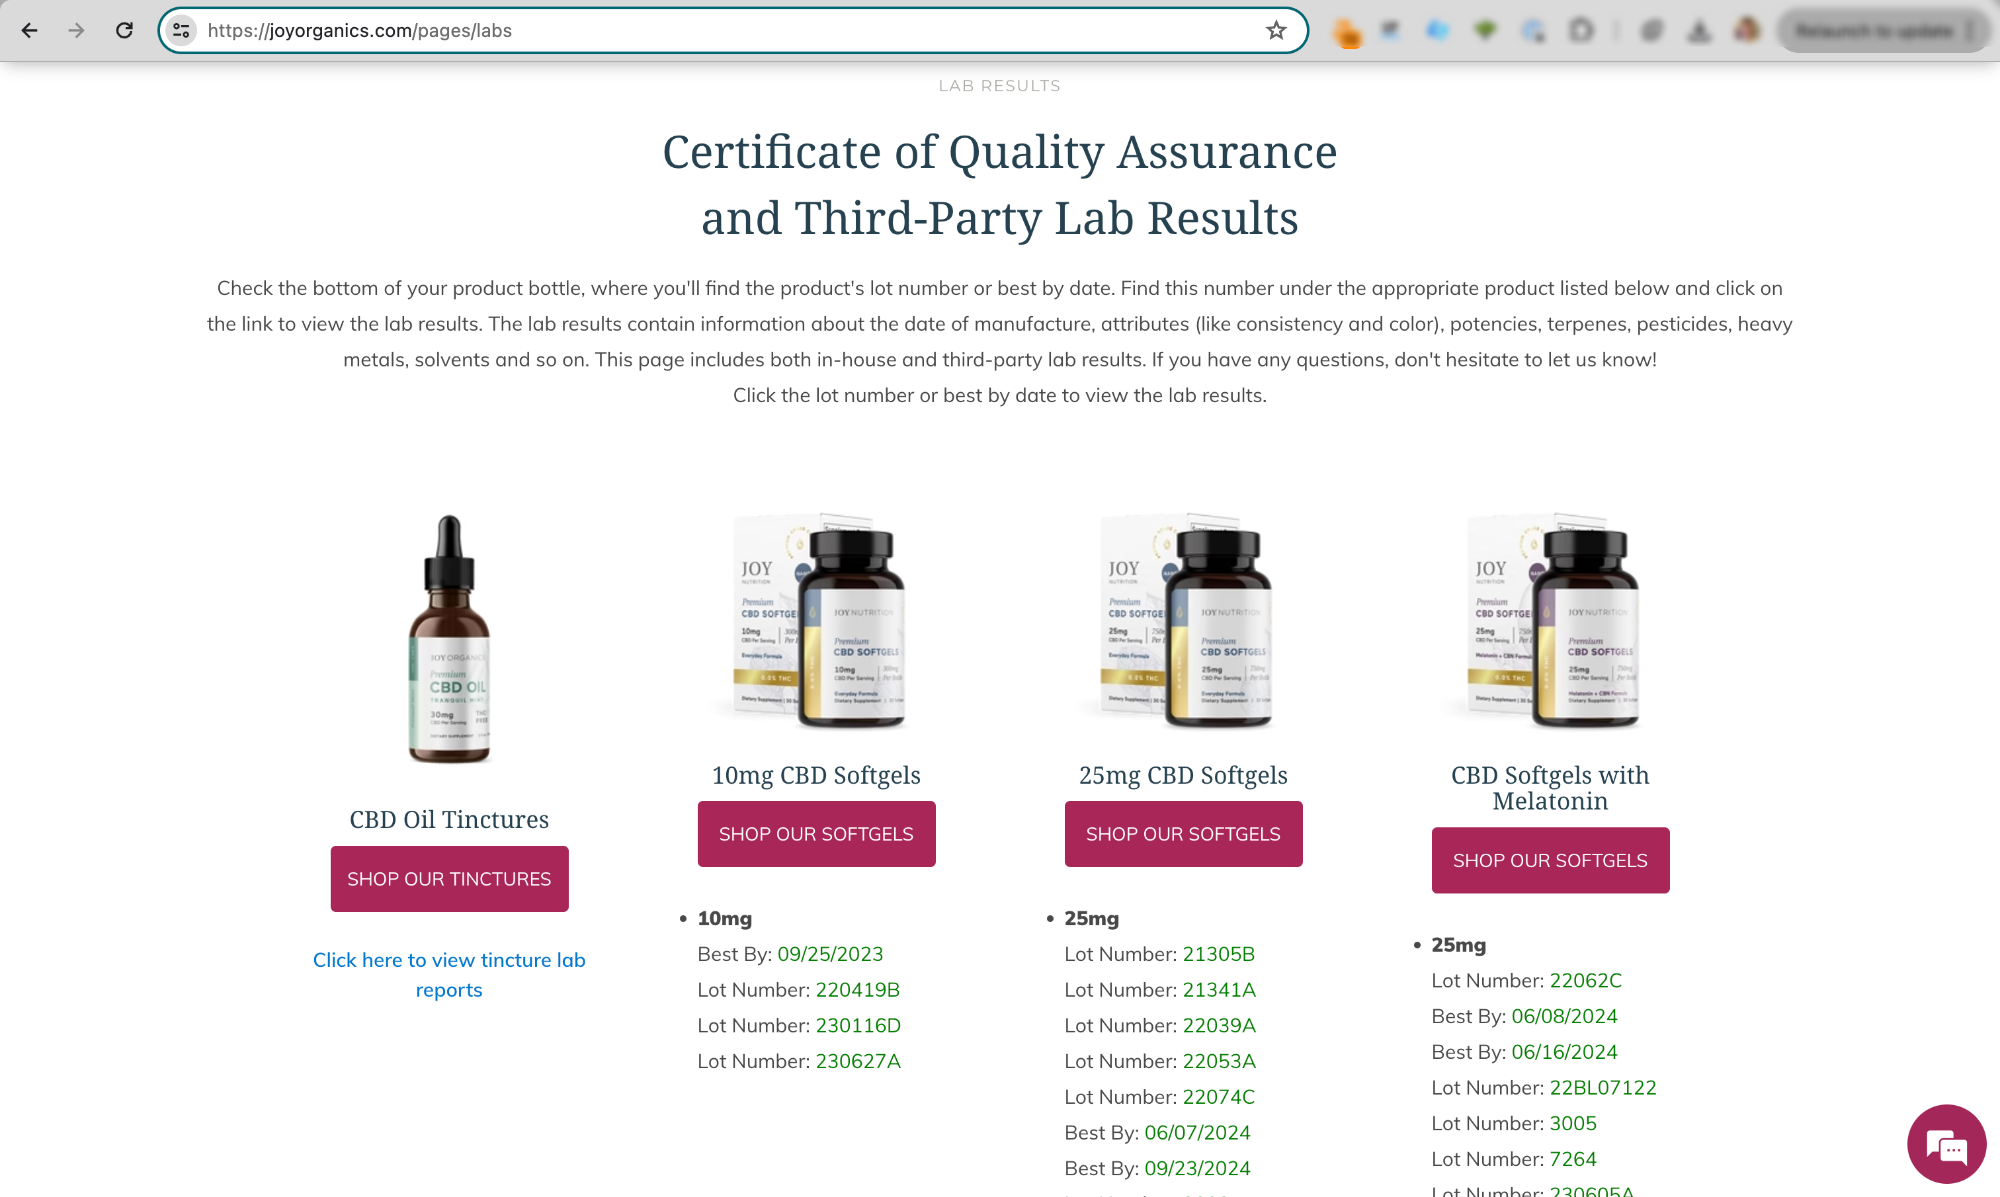 Web page with an archive of lab test reports for a range of Joy Organic CBD oils and capsules.